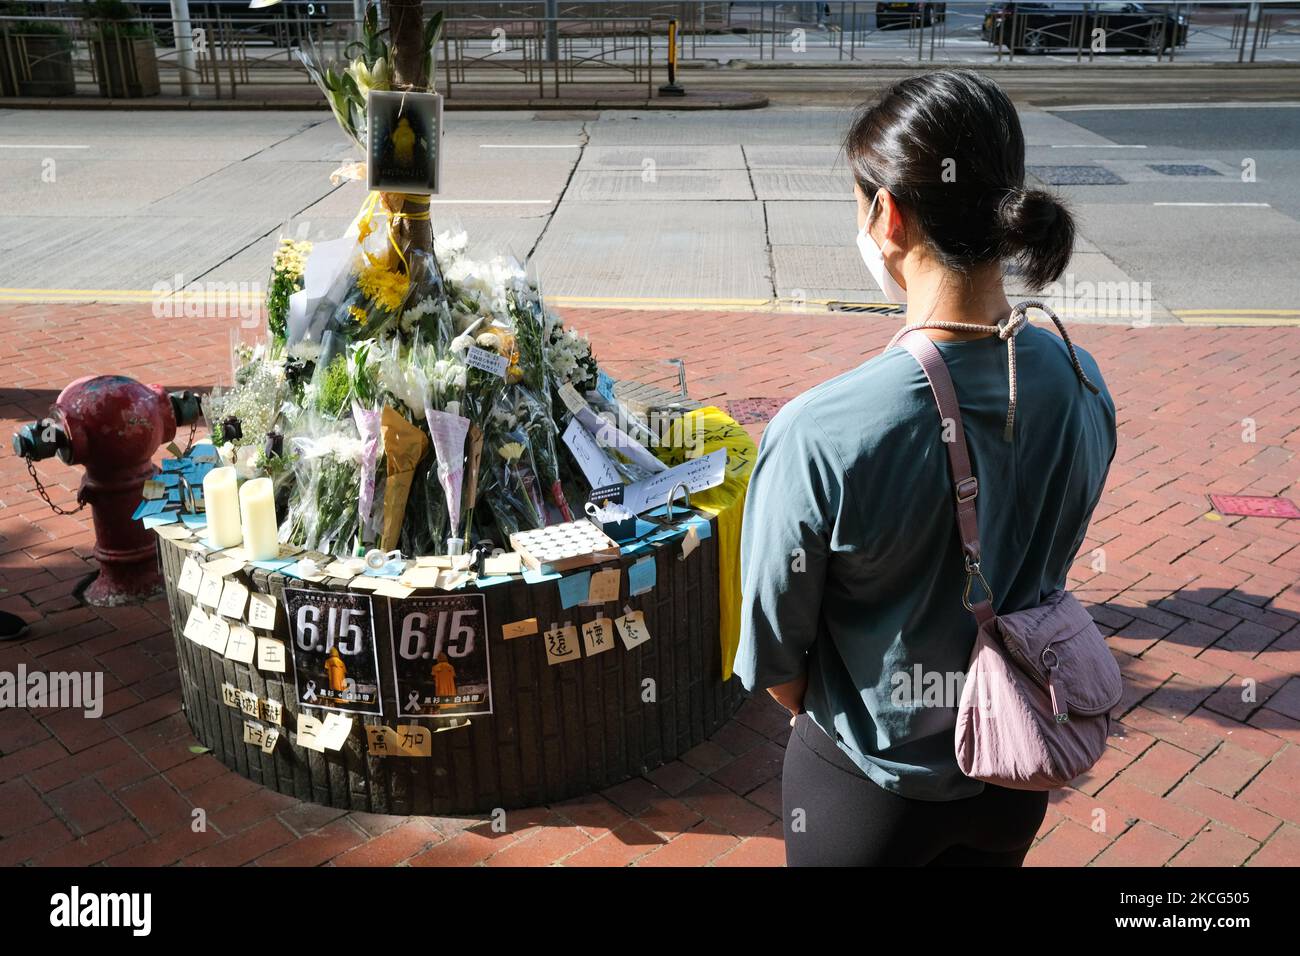 Someone came to mourn spontaneously, in Hong Kong, China, on June 15, 2021. June 15, 2021, is the second anniversary of the death of Hong Kong's first Anti-ELAB Movement protester. Many citizens came to mourn and offer flowers spontaneously. Police officers were also present at the scene to control the flow of people on the grounds of epidemic prevention. (Photo by Leung Man Hei/NurPhoto) Stock Photo